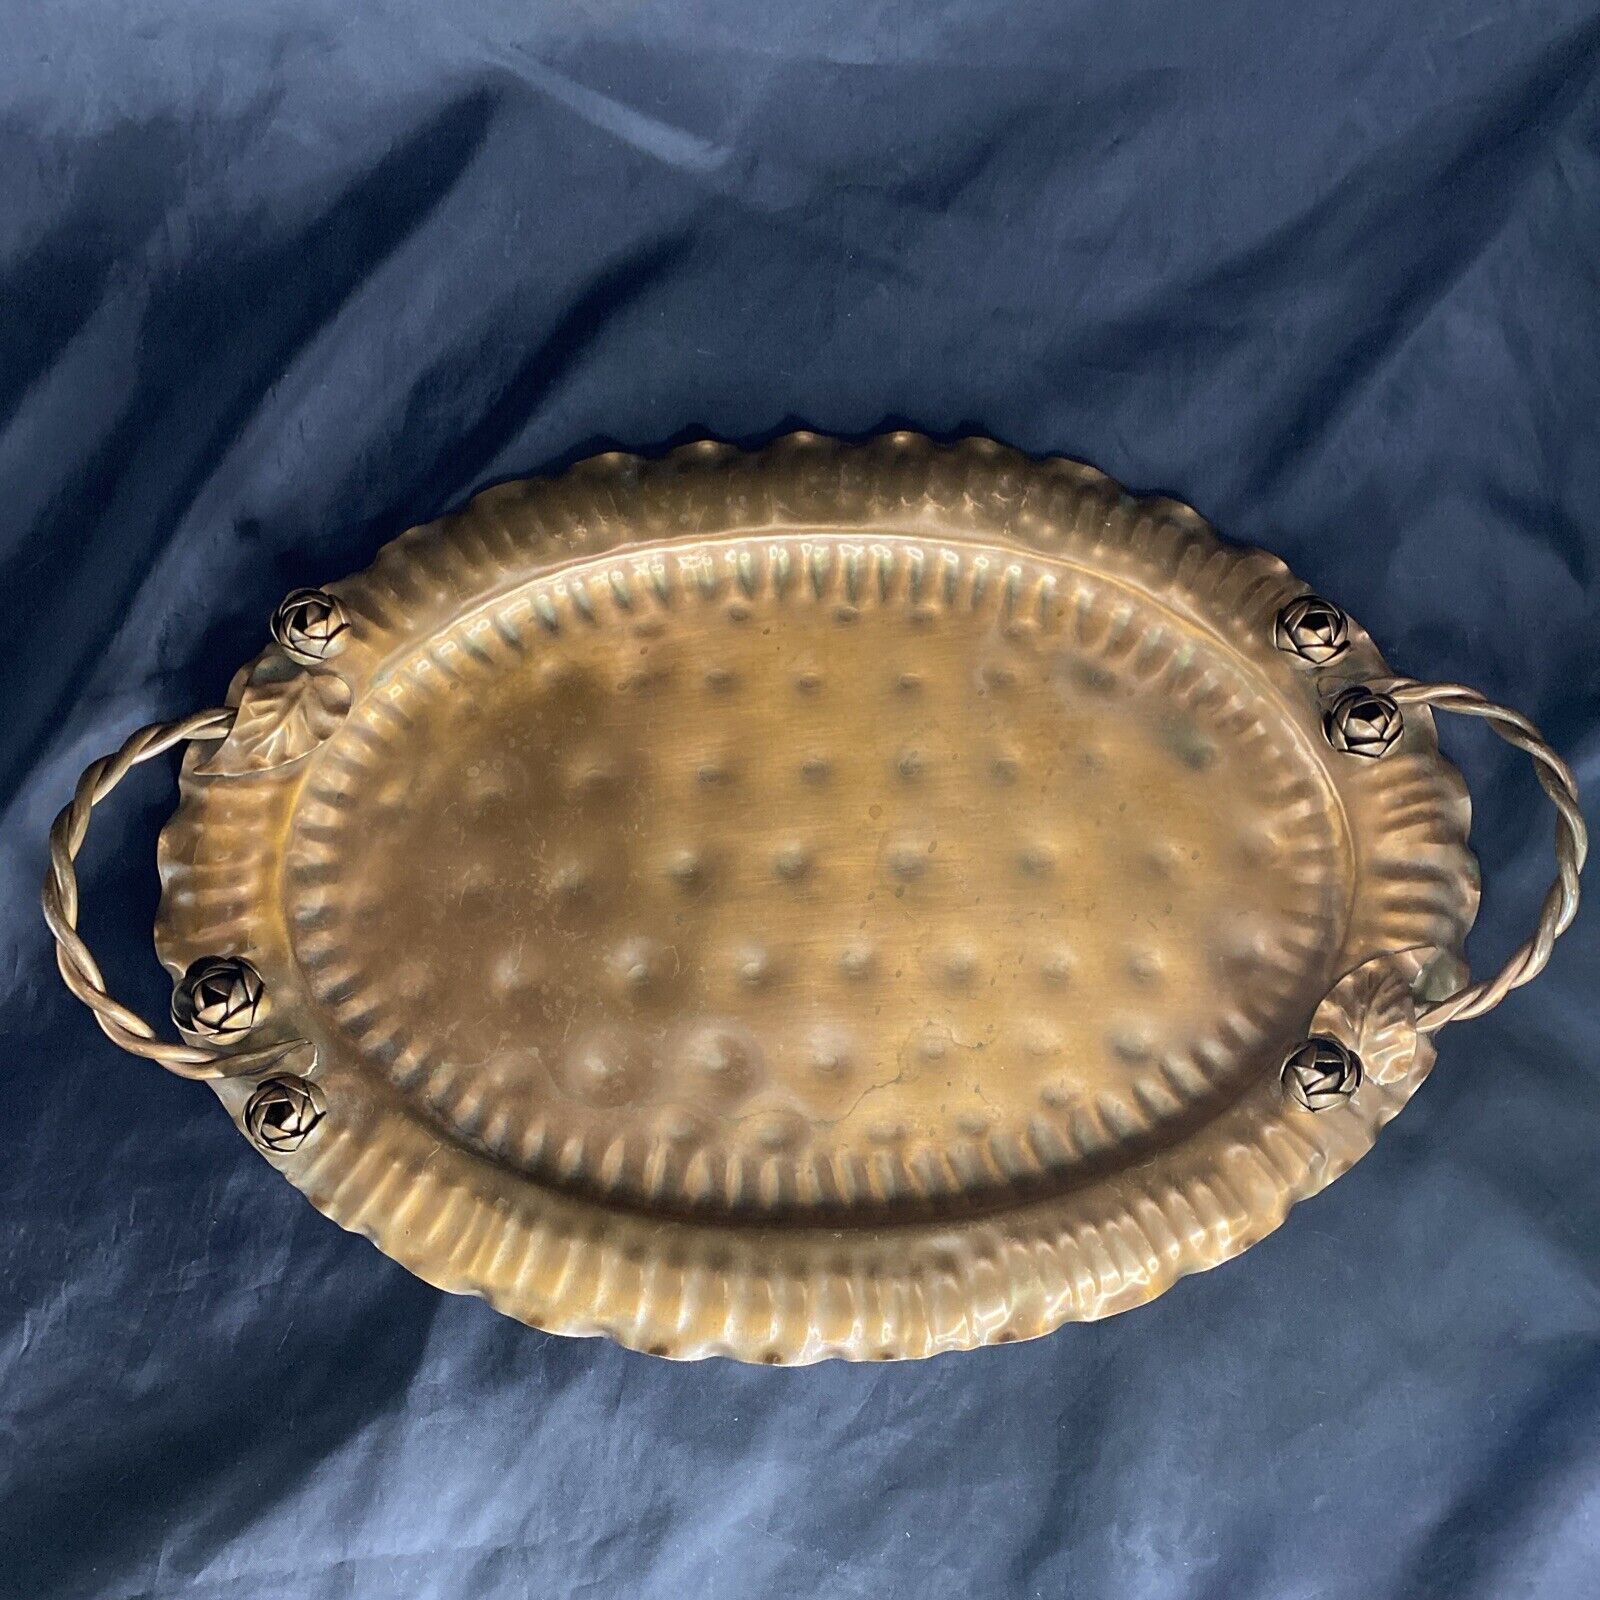 Vintage Gregorian Hammered Copper Tray W Twisted Handles And Copper Roses 17”